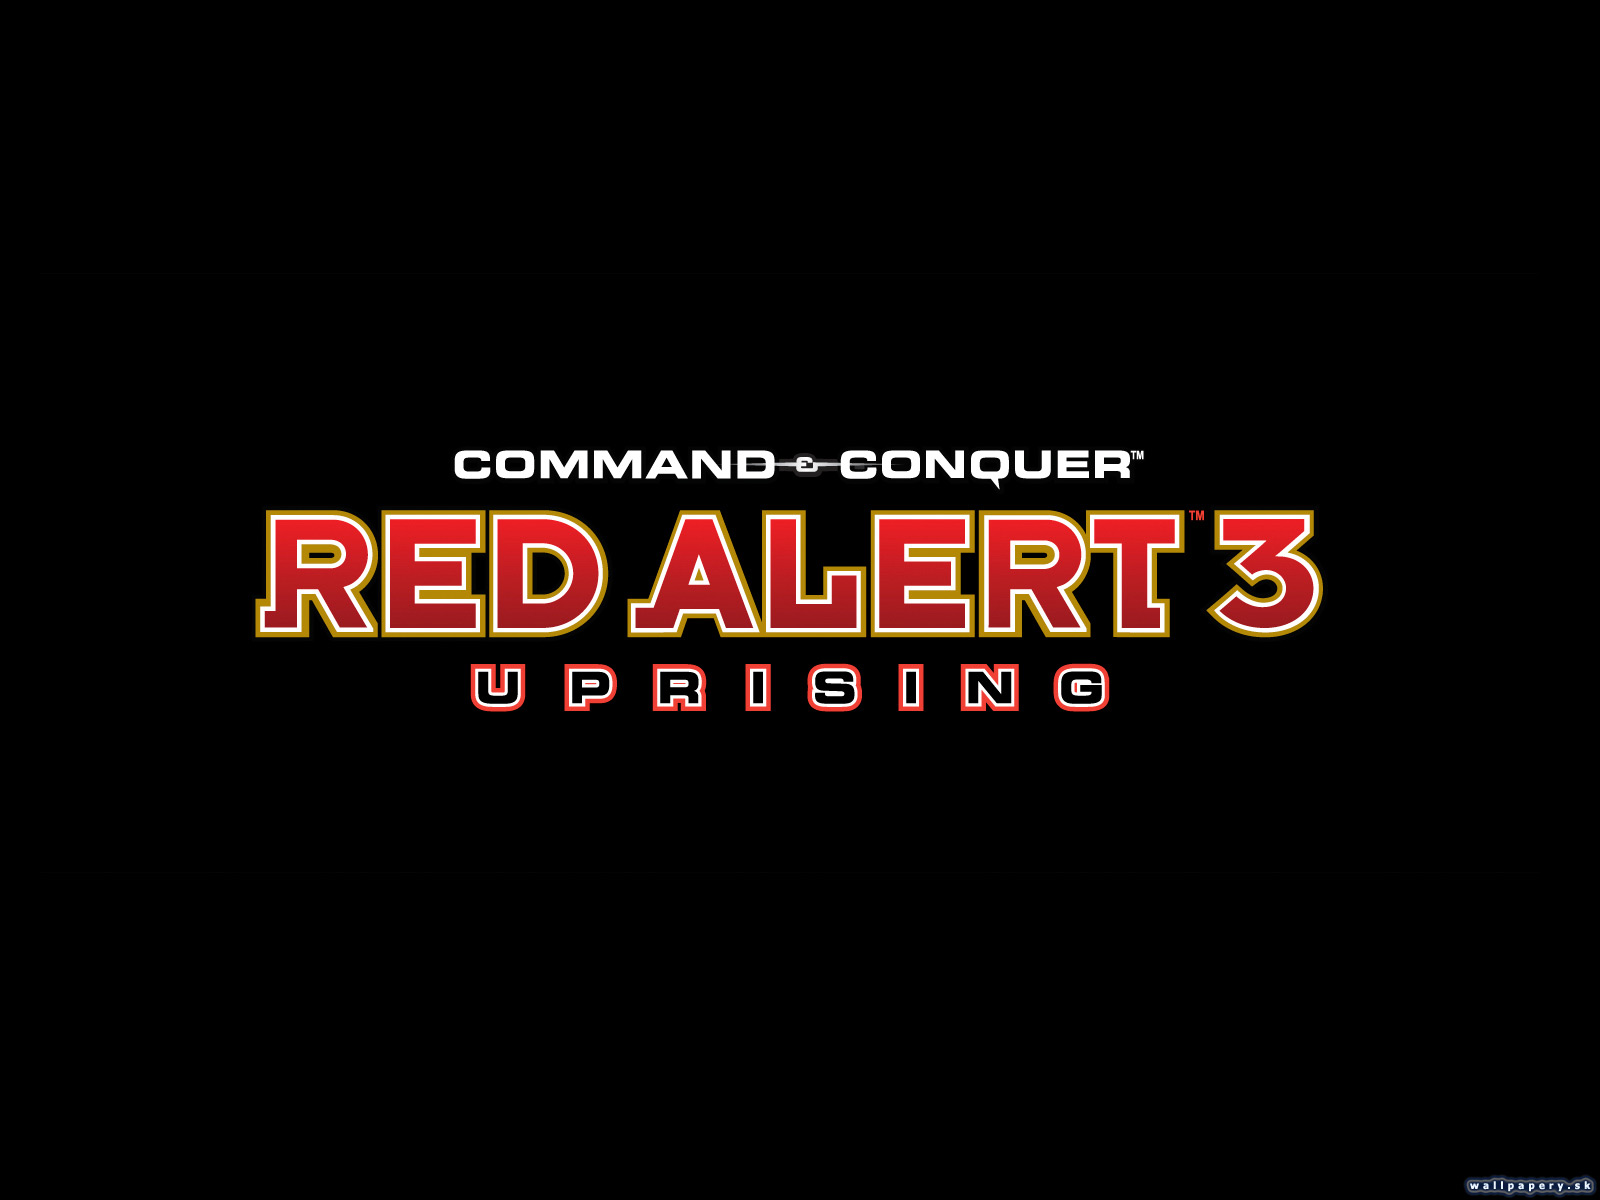 Command & Conquer: Red Alert 3: Uprising - wallpaper 3